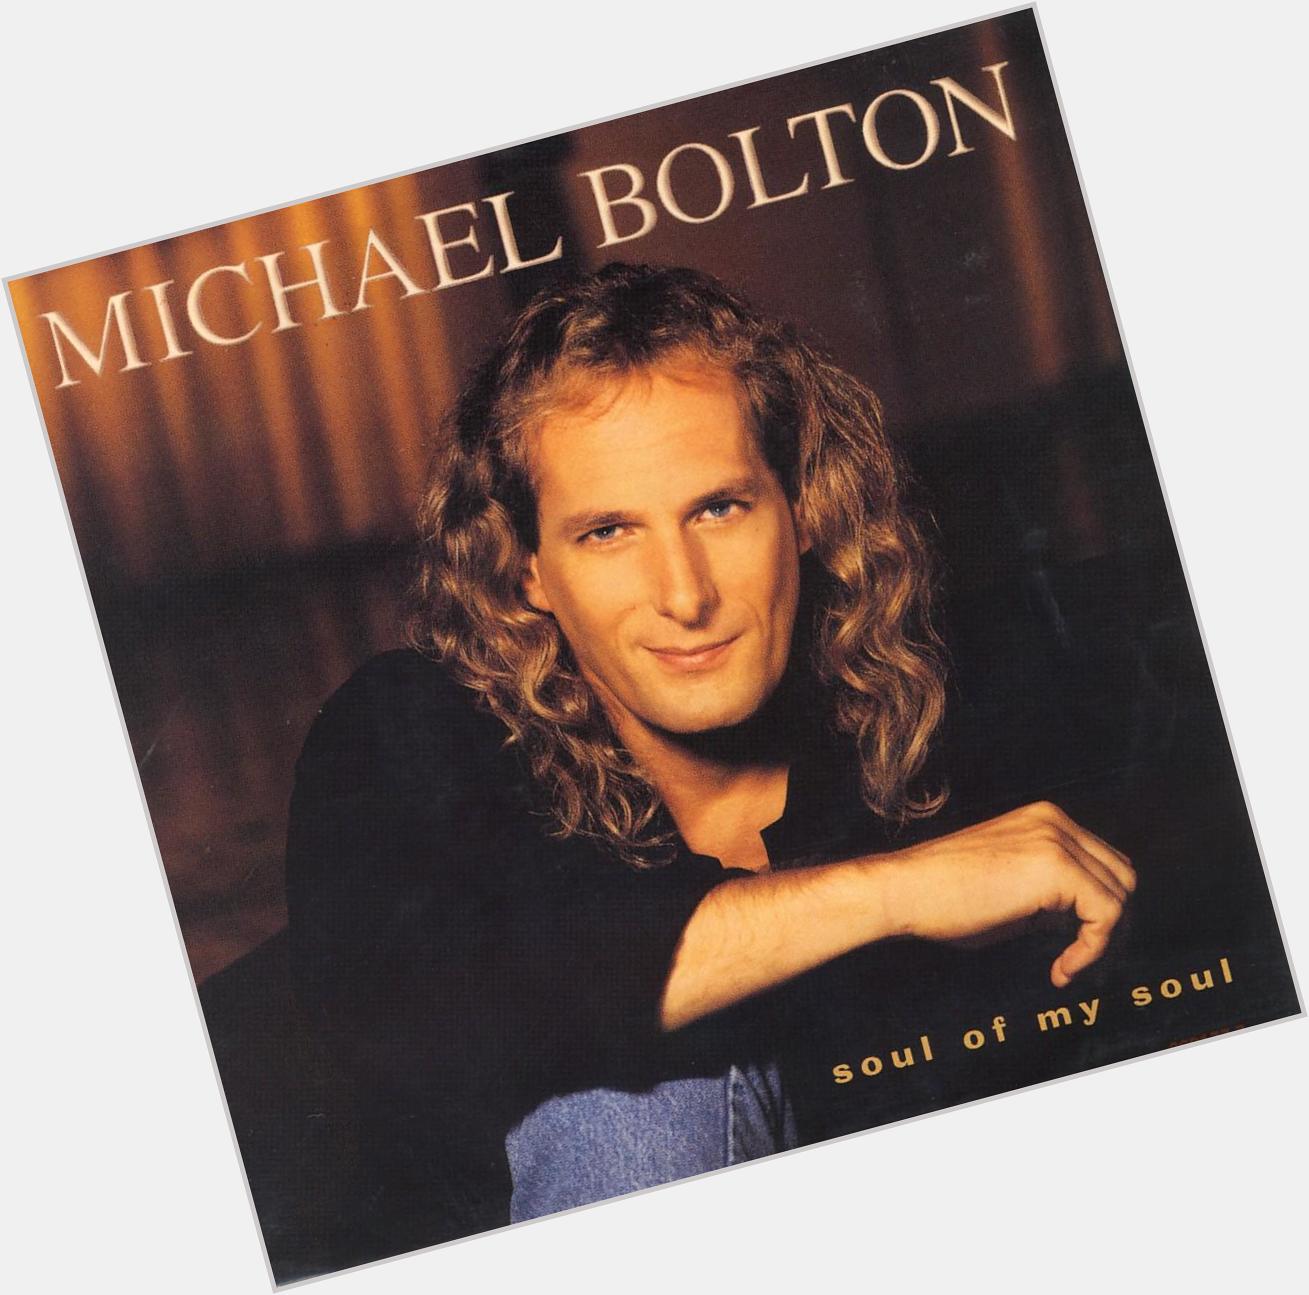 Happy Birthday to Michael Bolton, who turns 62 today! 